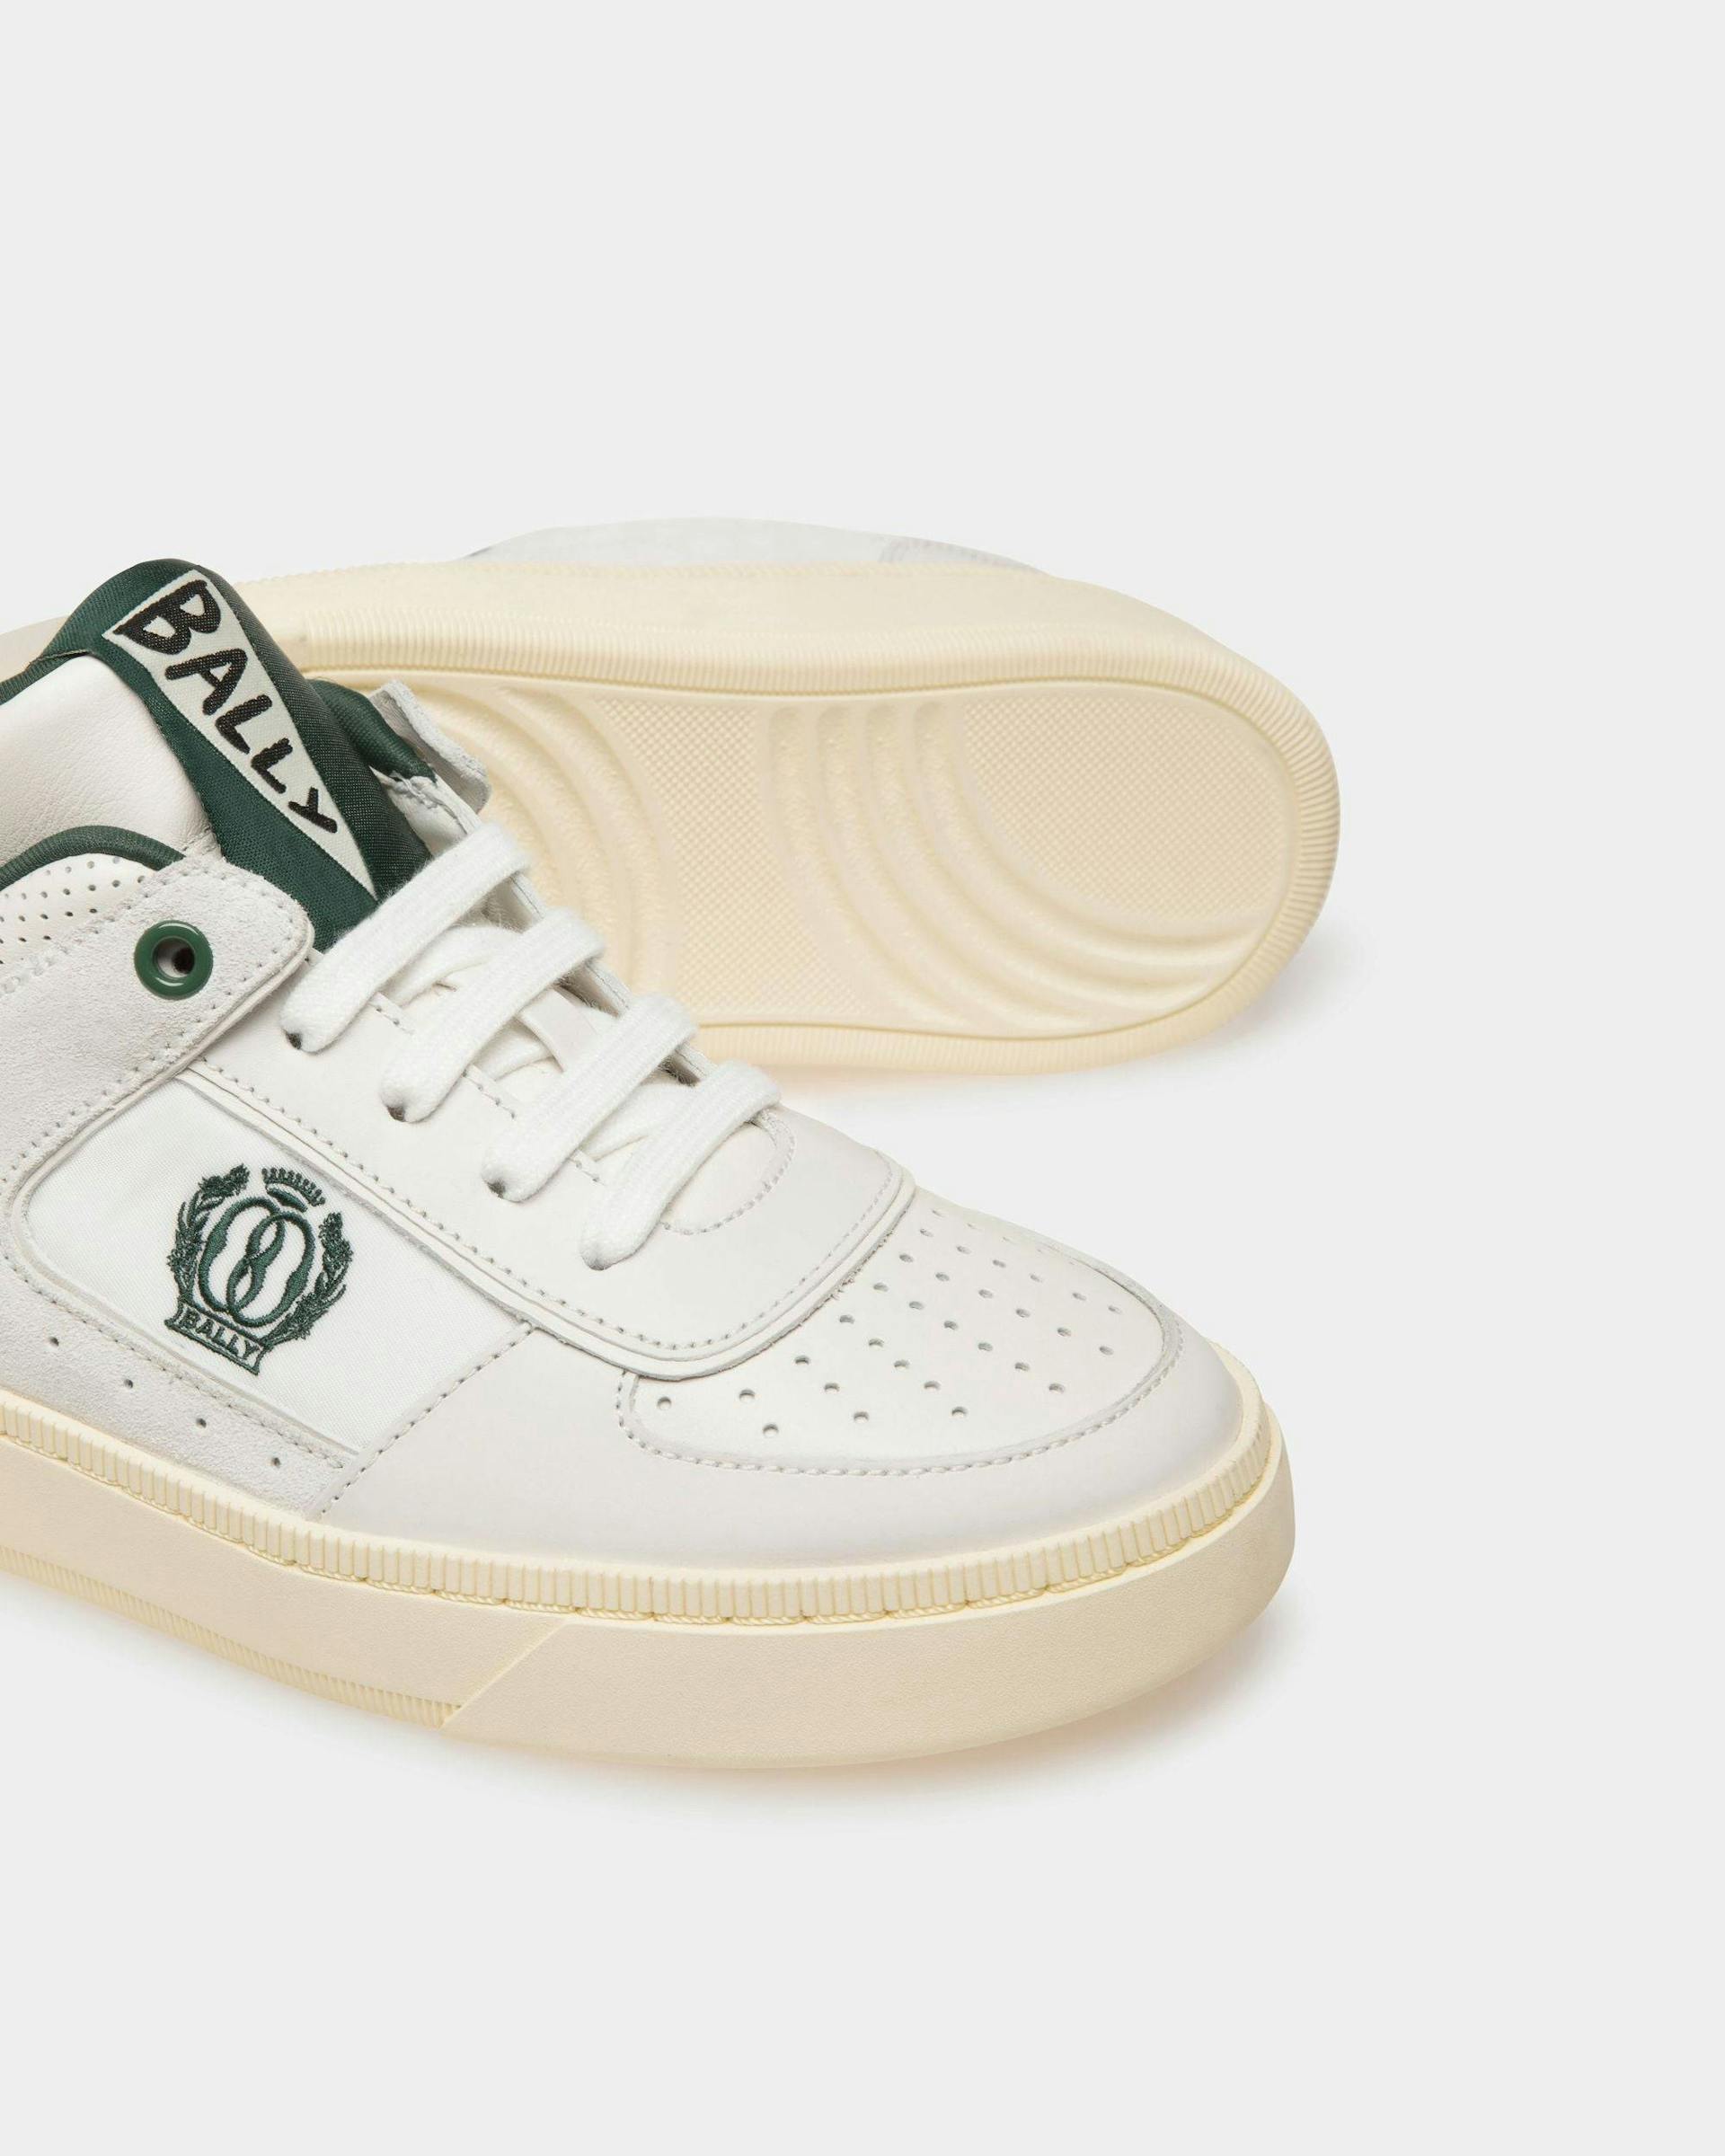 Women's Raise Sneakers In White And Green Leather | Bally | Still Life Below